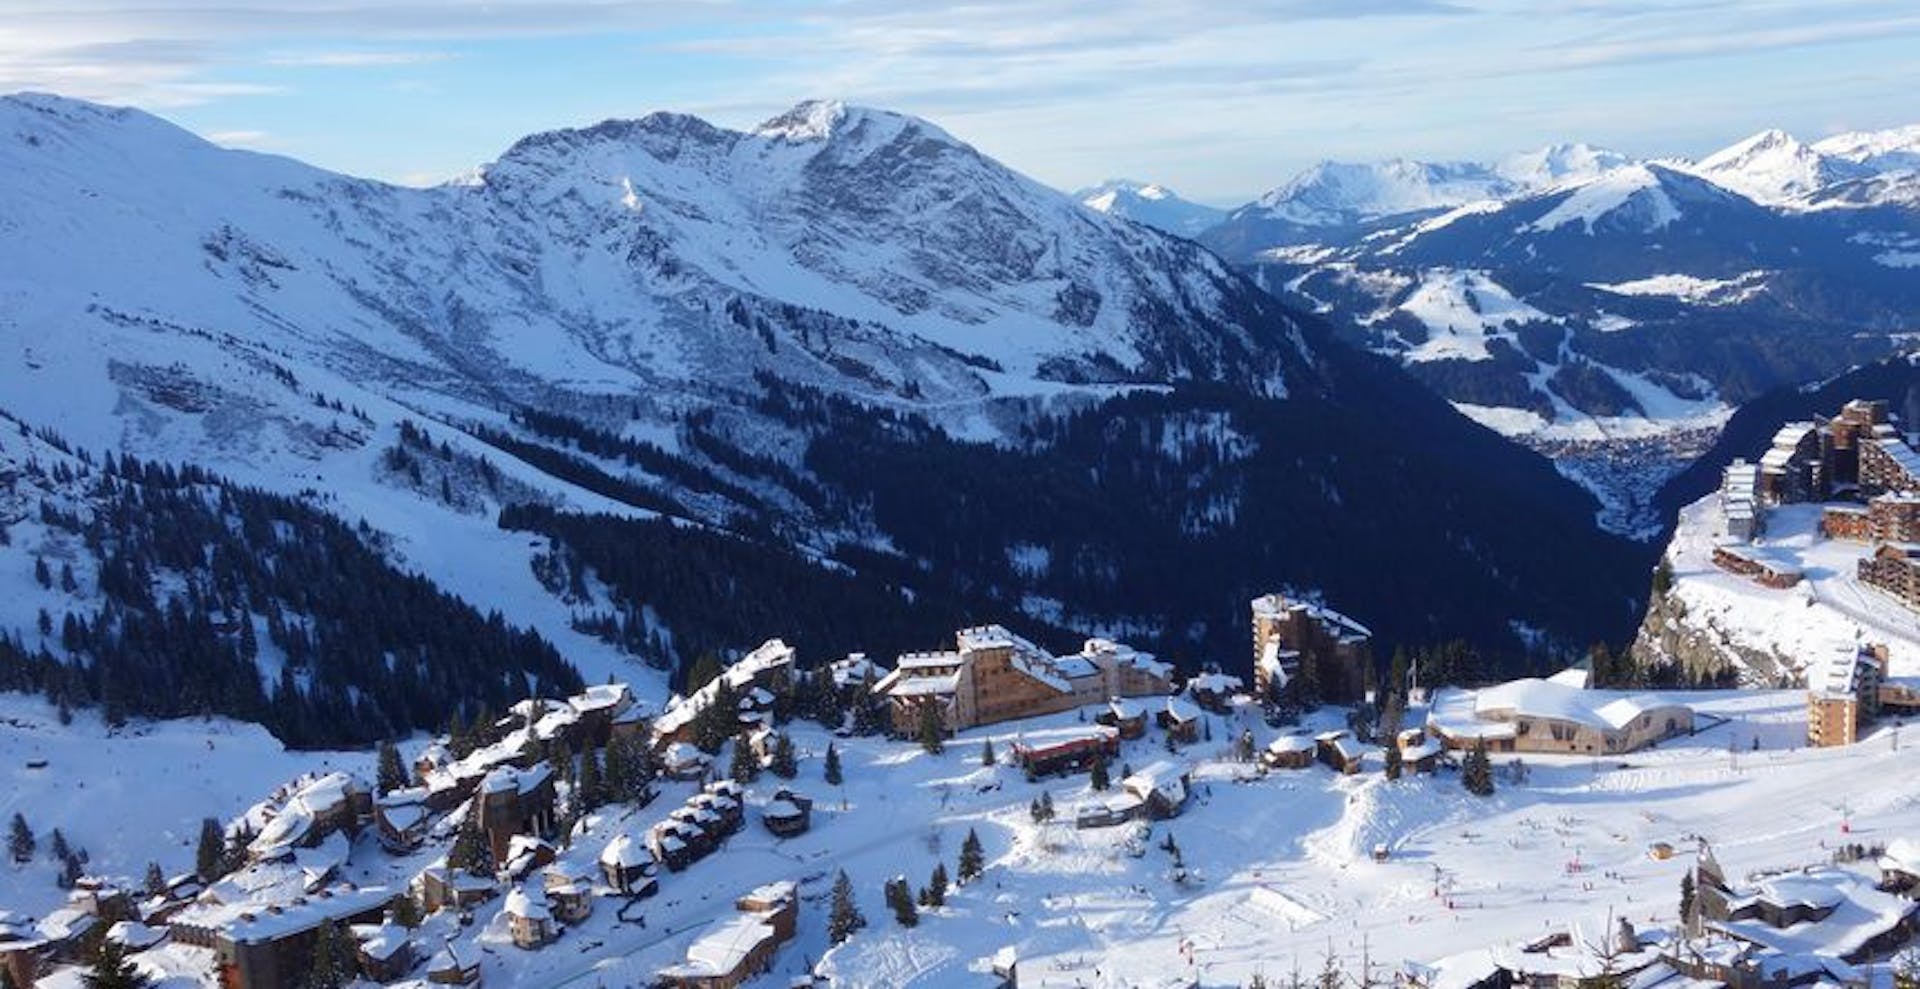 Good lift links to the rest of Portes du Soleil makes Avoriaz an ideal choice